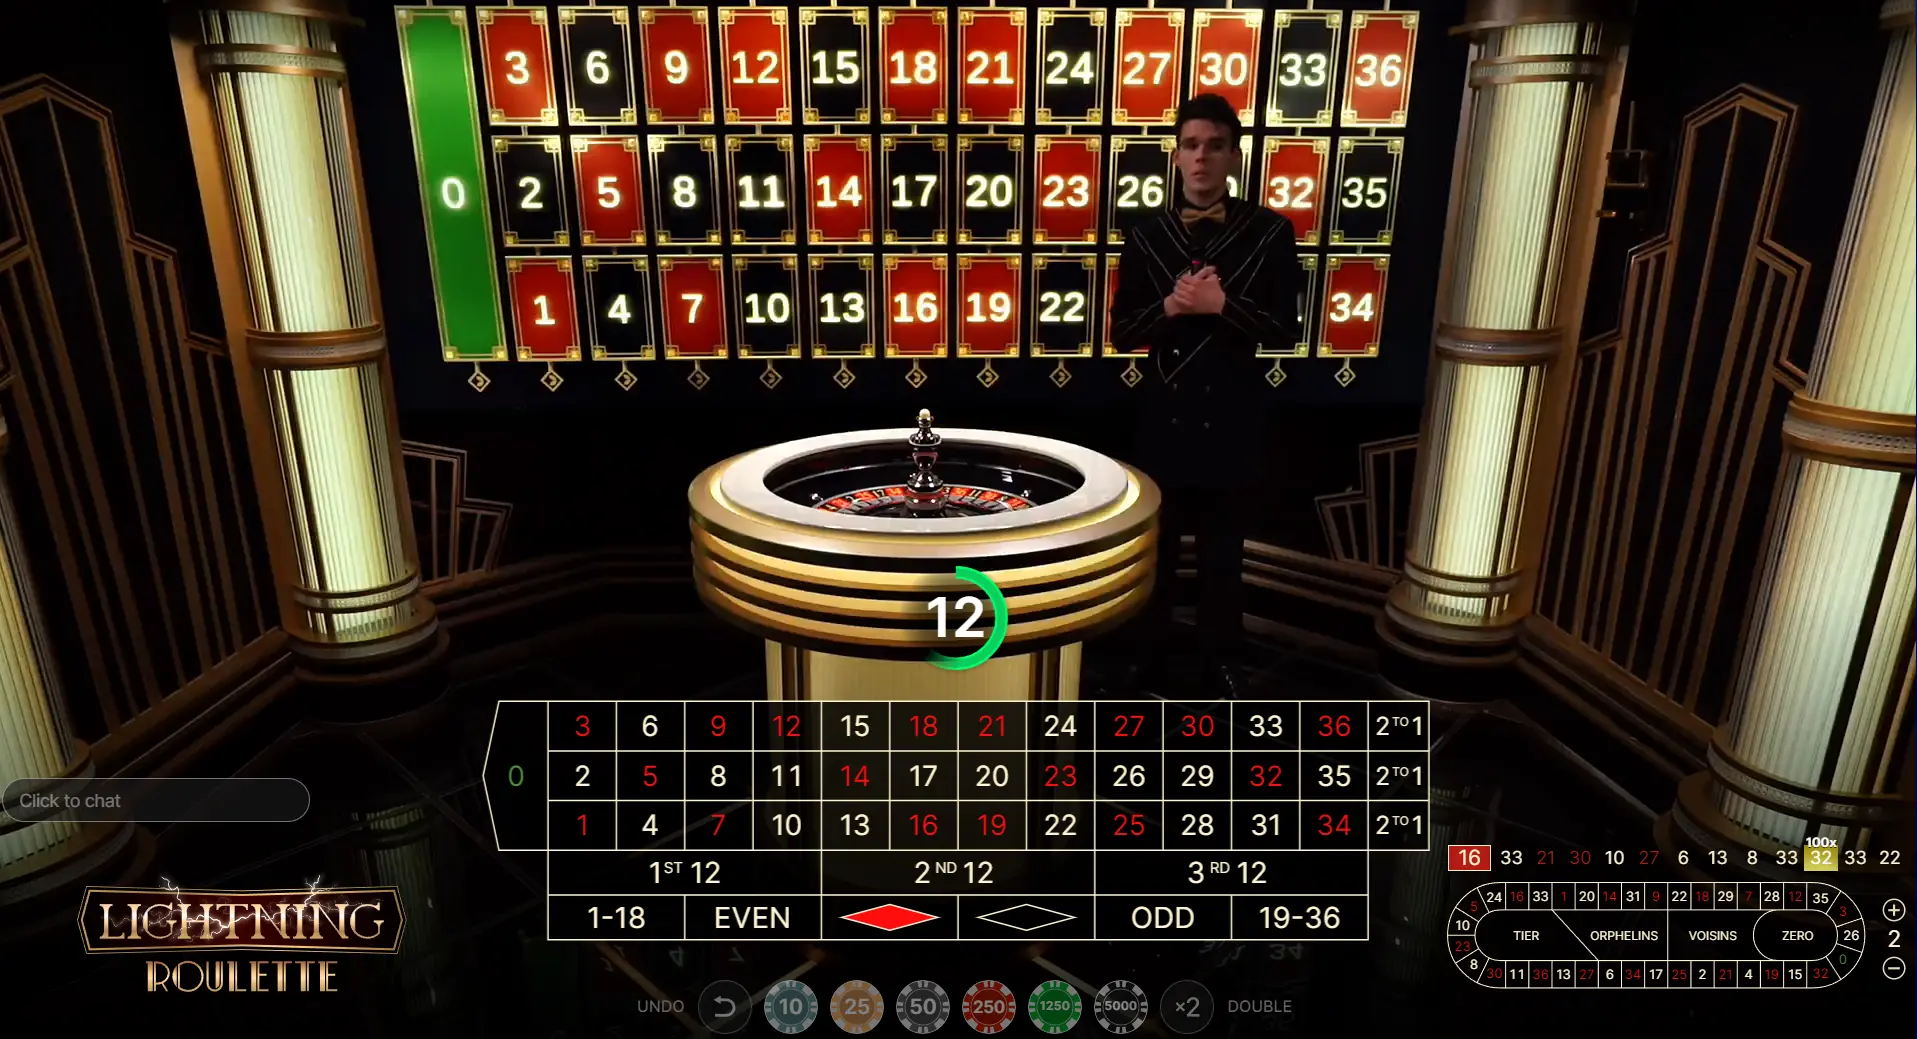 strategies tailored to Lightning Roulette's distinct dynamics and jackpot-filled potential